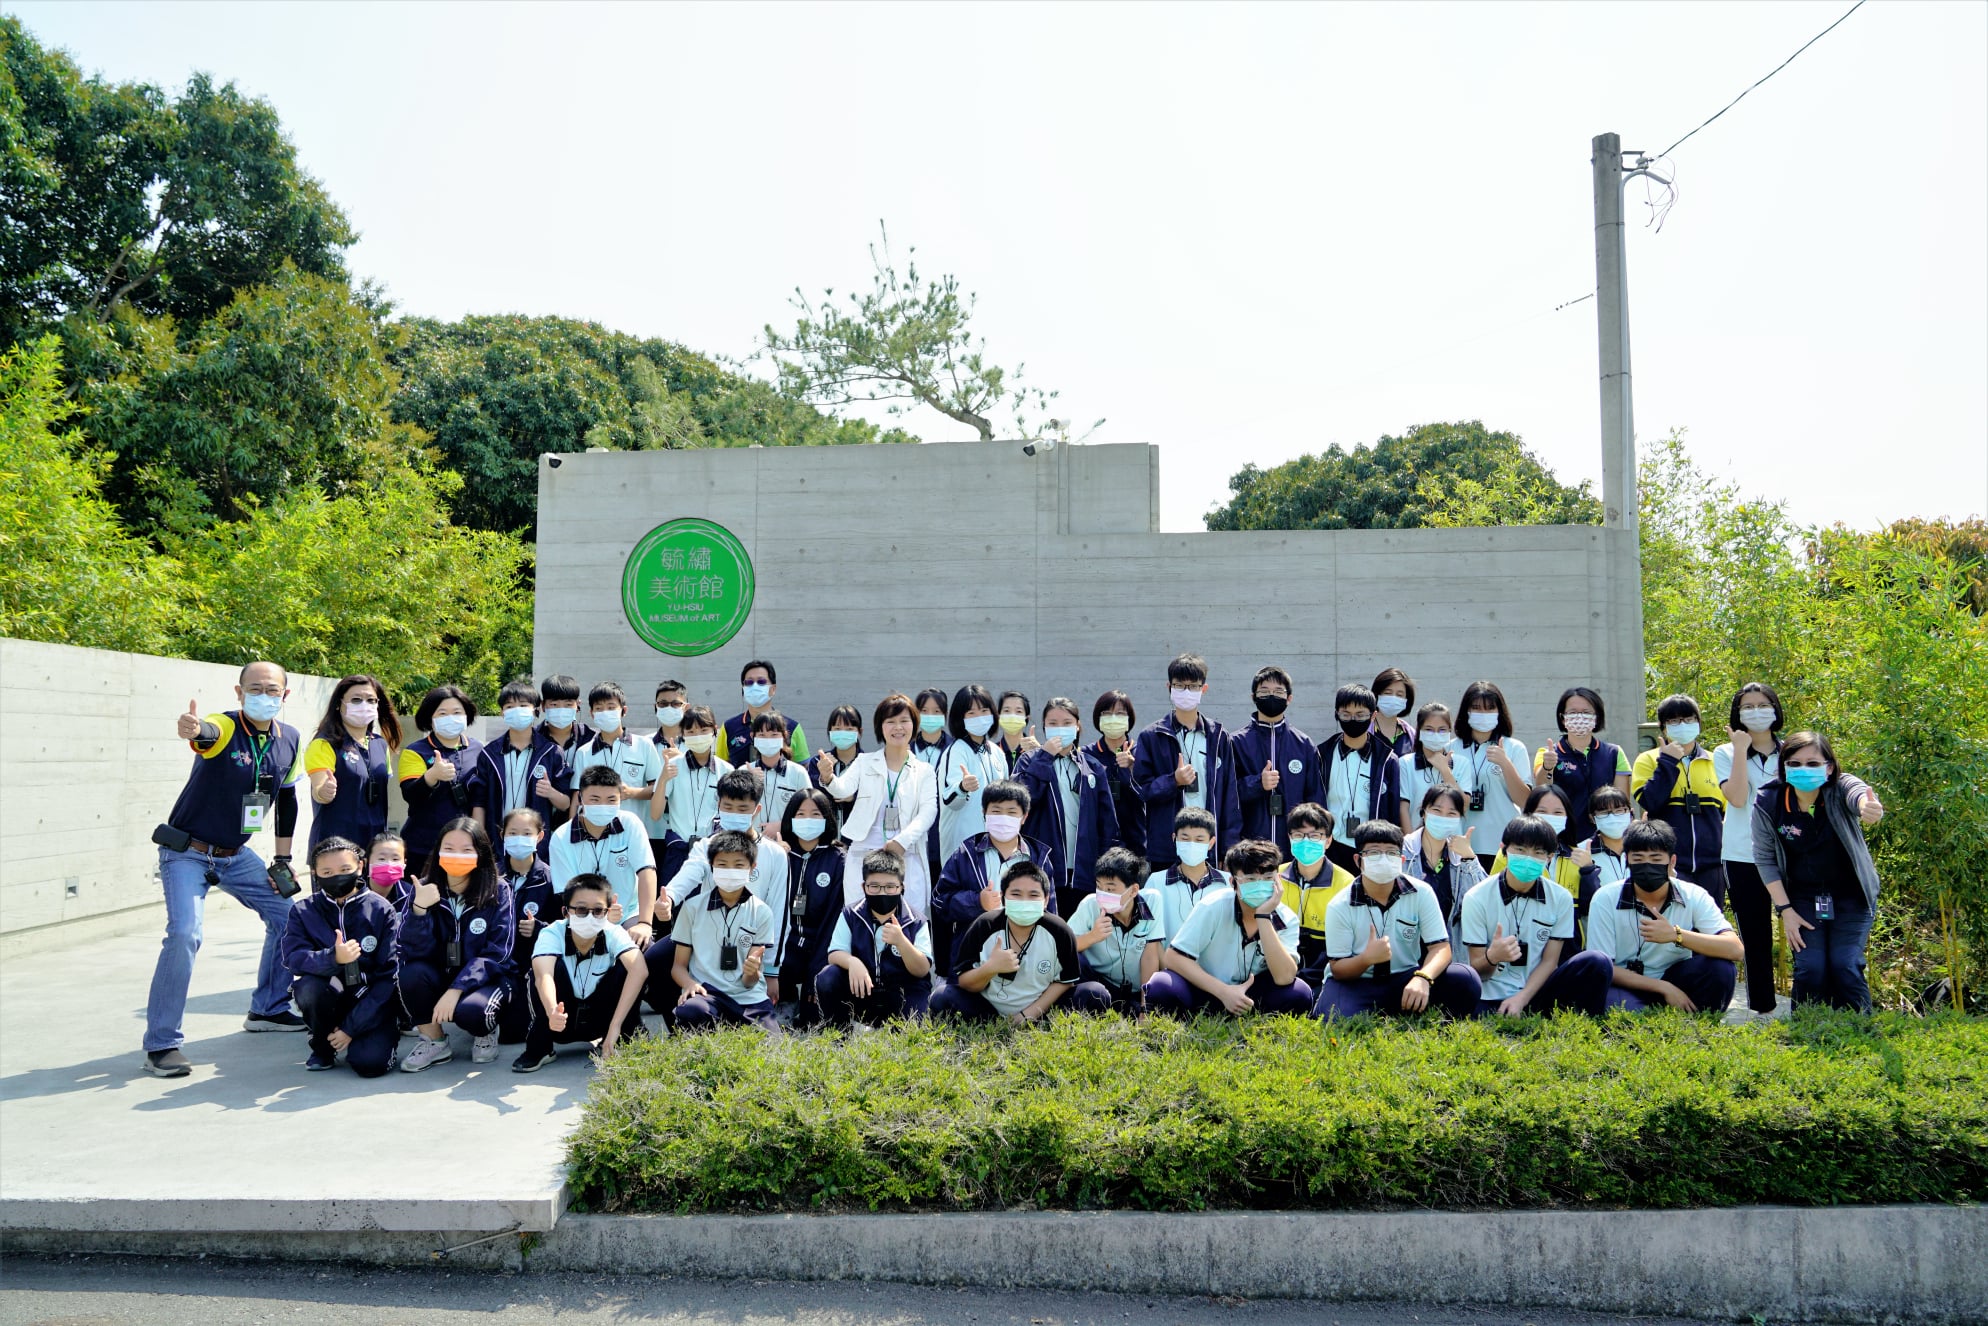 On a beautiful spring day, the teachers and students of Sheliao Middle School came to Yuxiu Art Museum together to start a whole-day aesthetic experience.